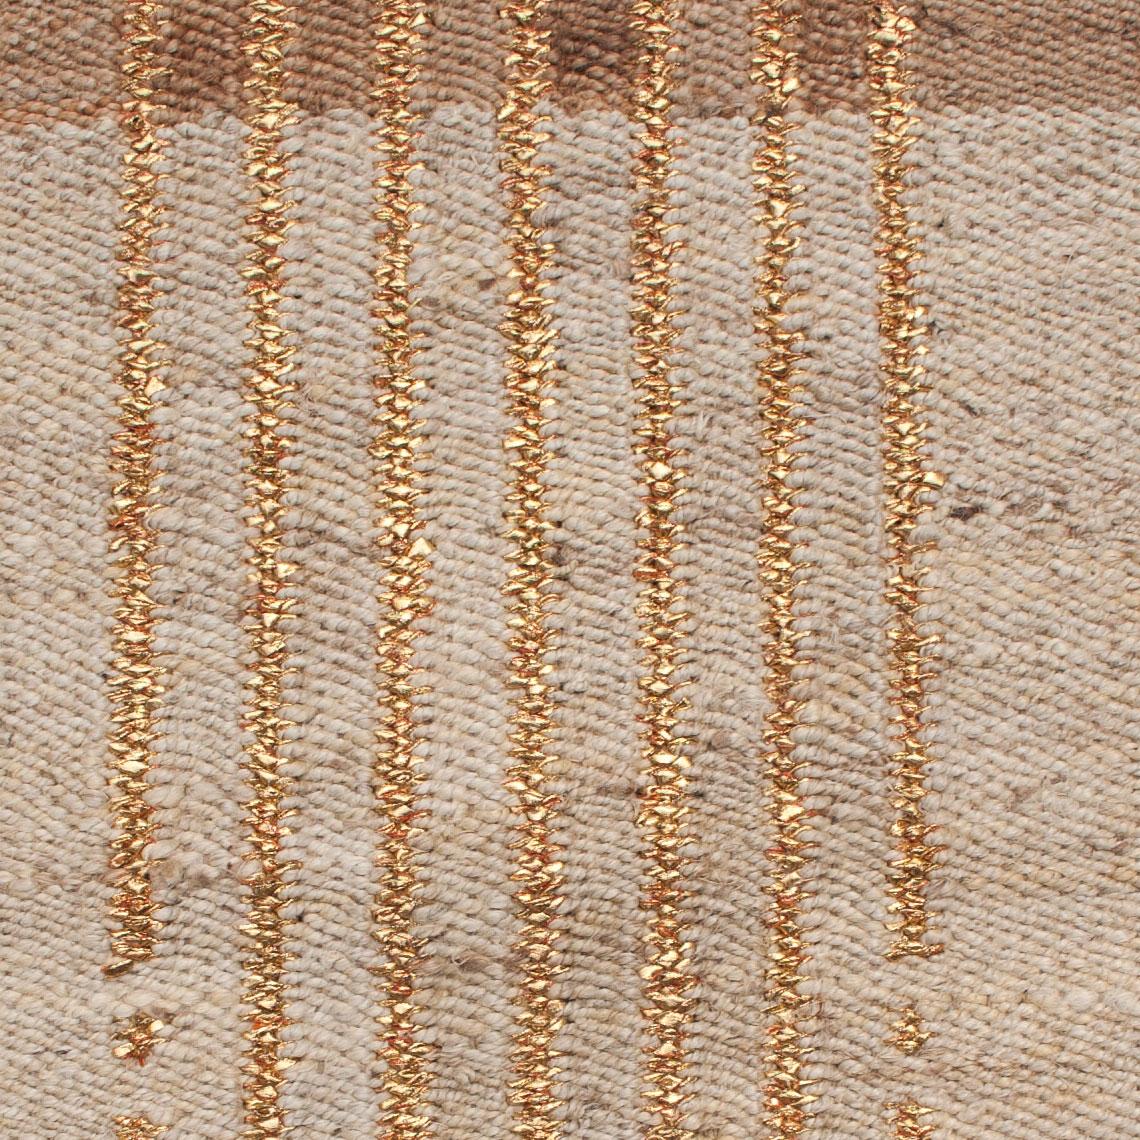 Indian Geometric Lola Gold Lines Handwoven Modern Jute Rug, Carpet and Durrie